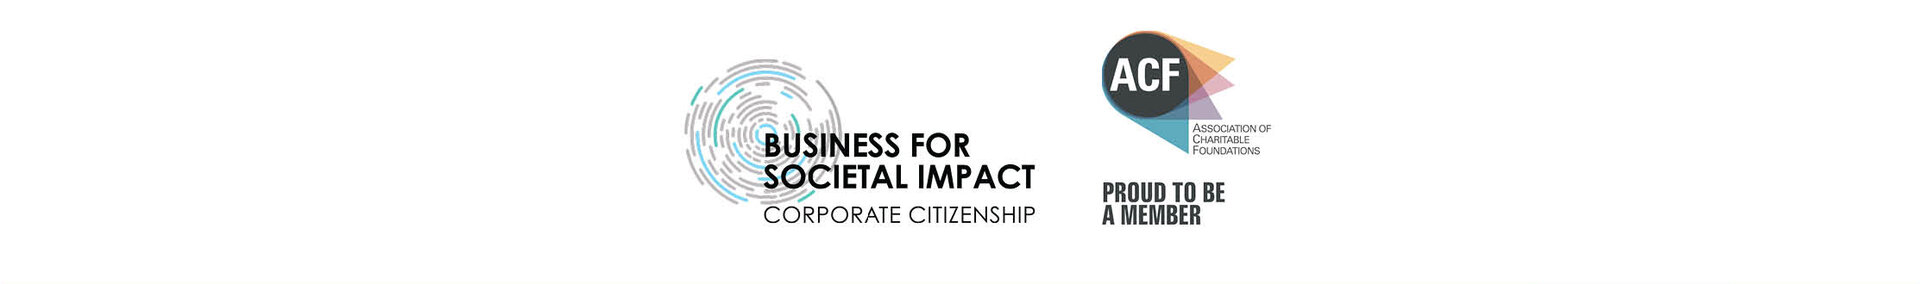 Memberships: Business for Societal Impact, and Association of Charitable Foundations